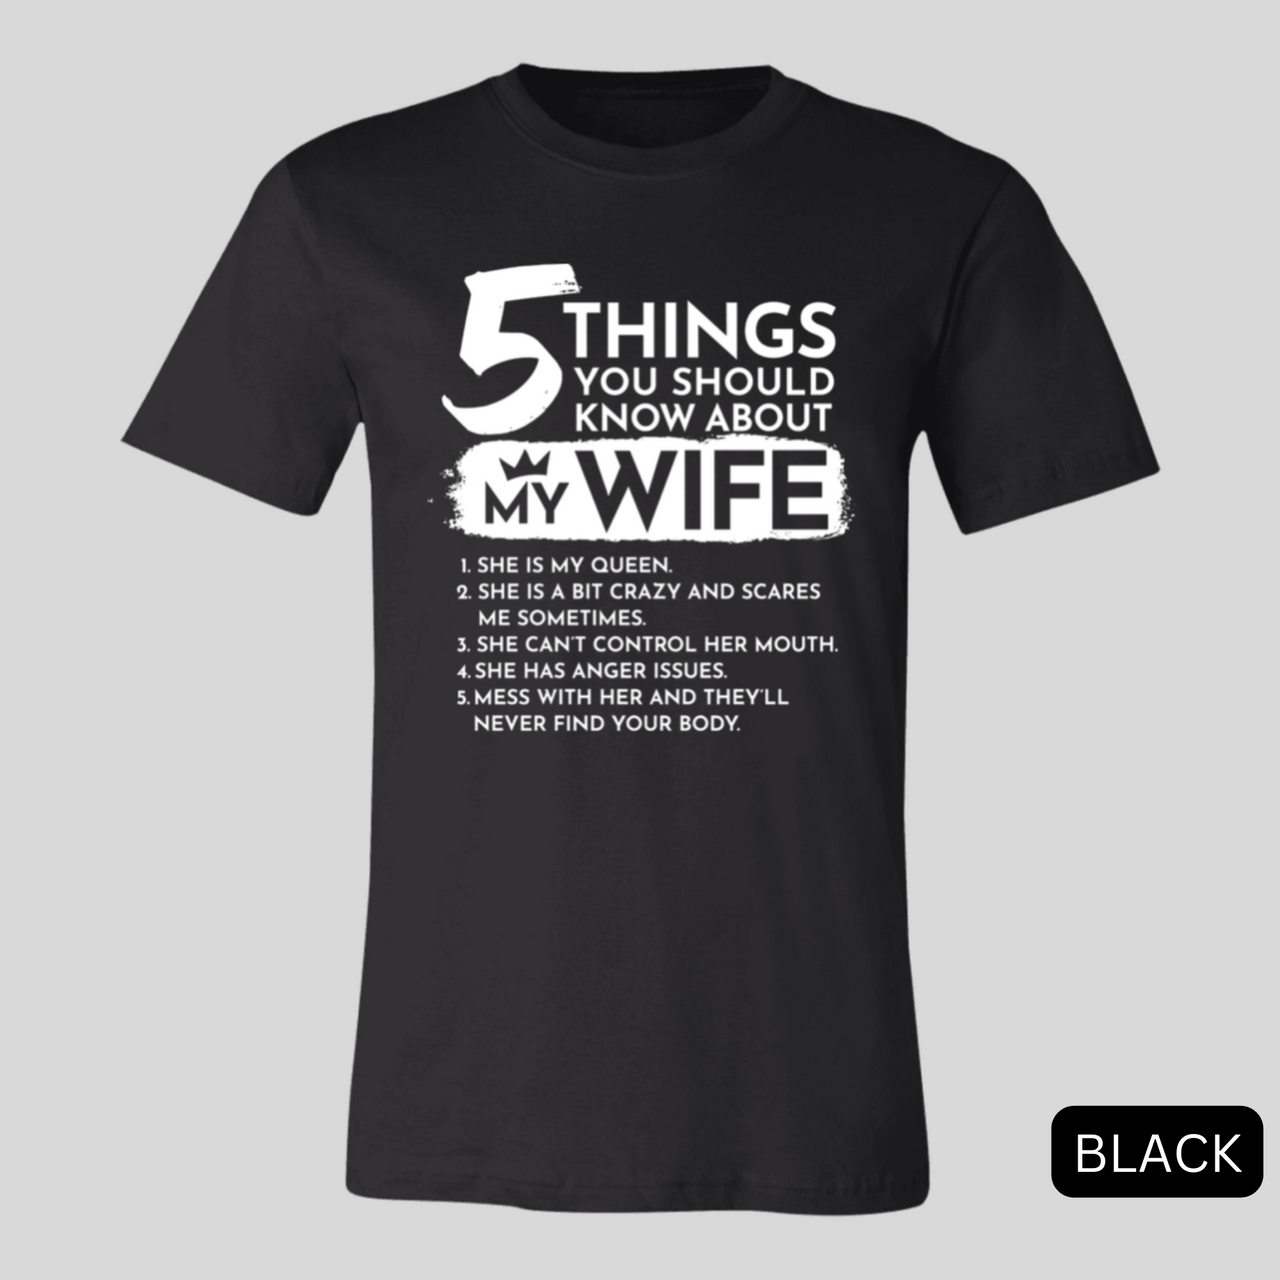 5 things you should know about my wife black shirt